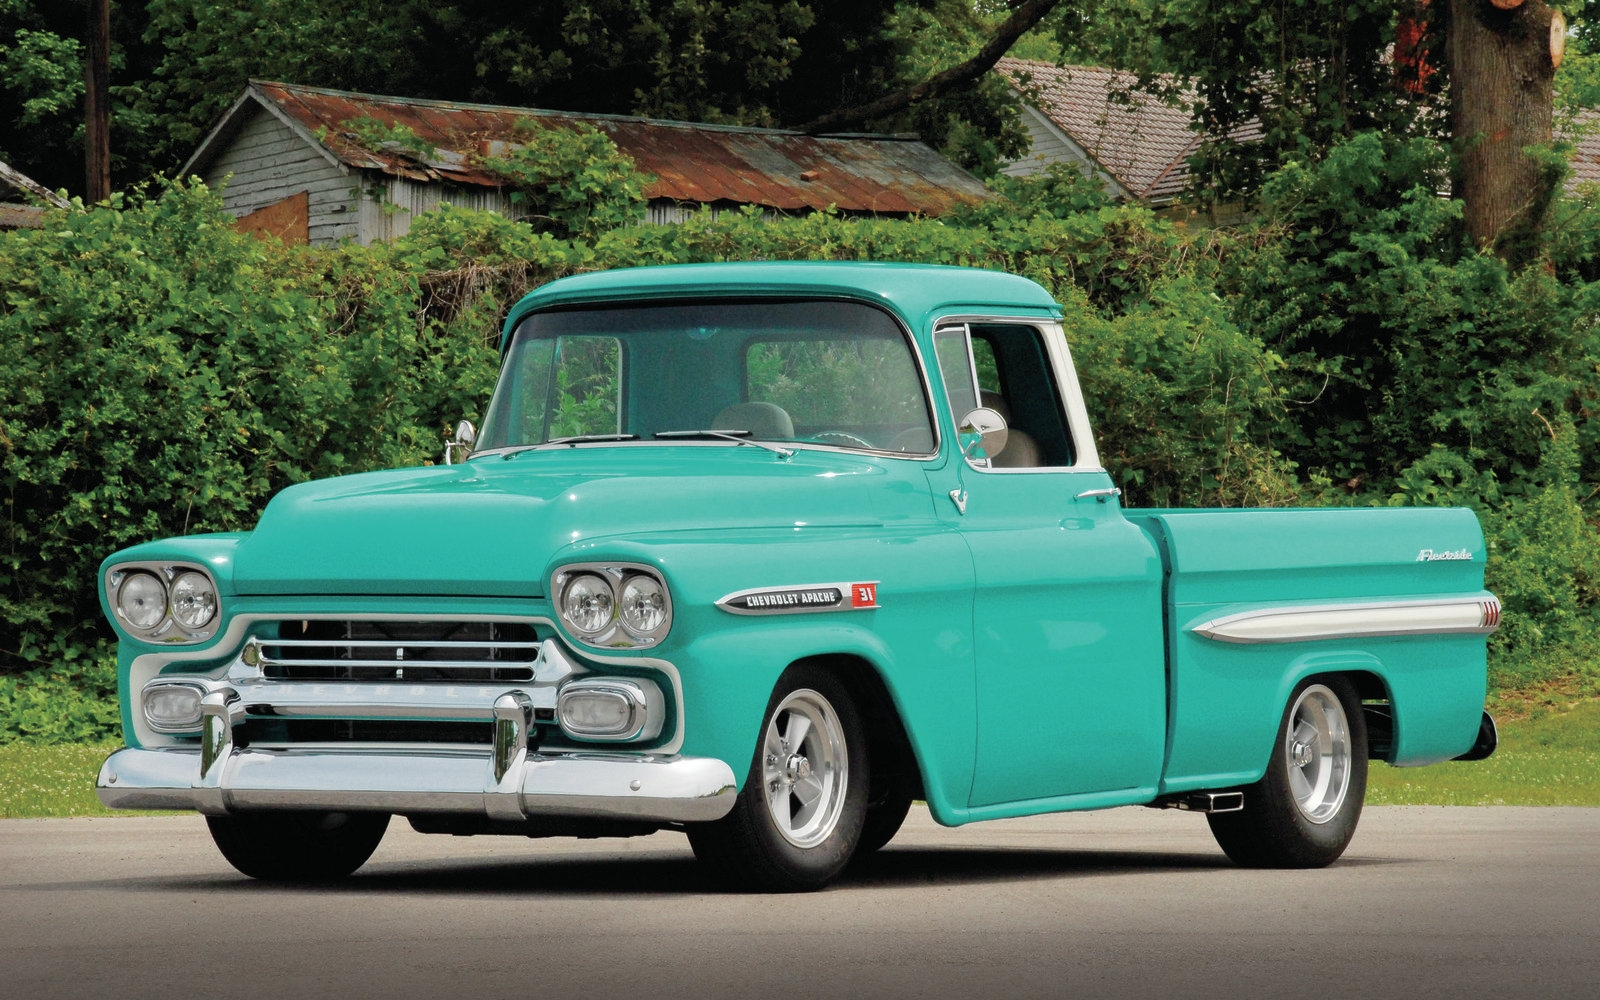 1959 Chevrolet Apache Wallpapers